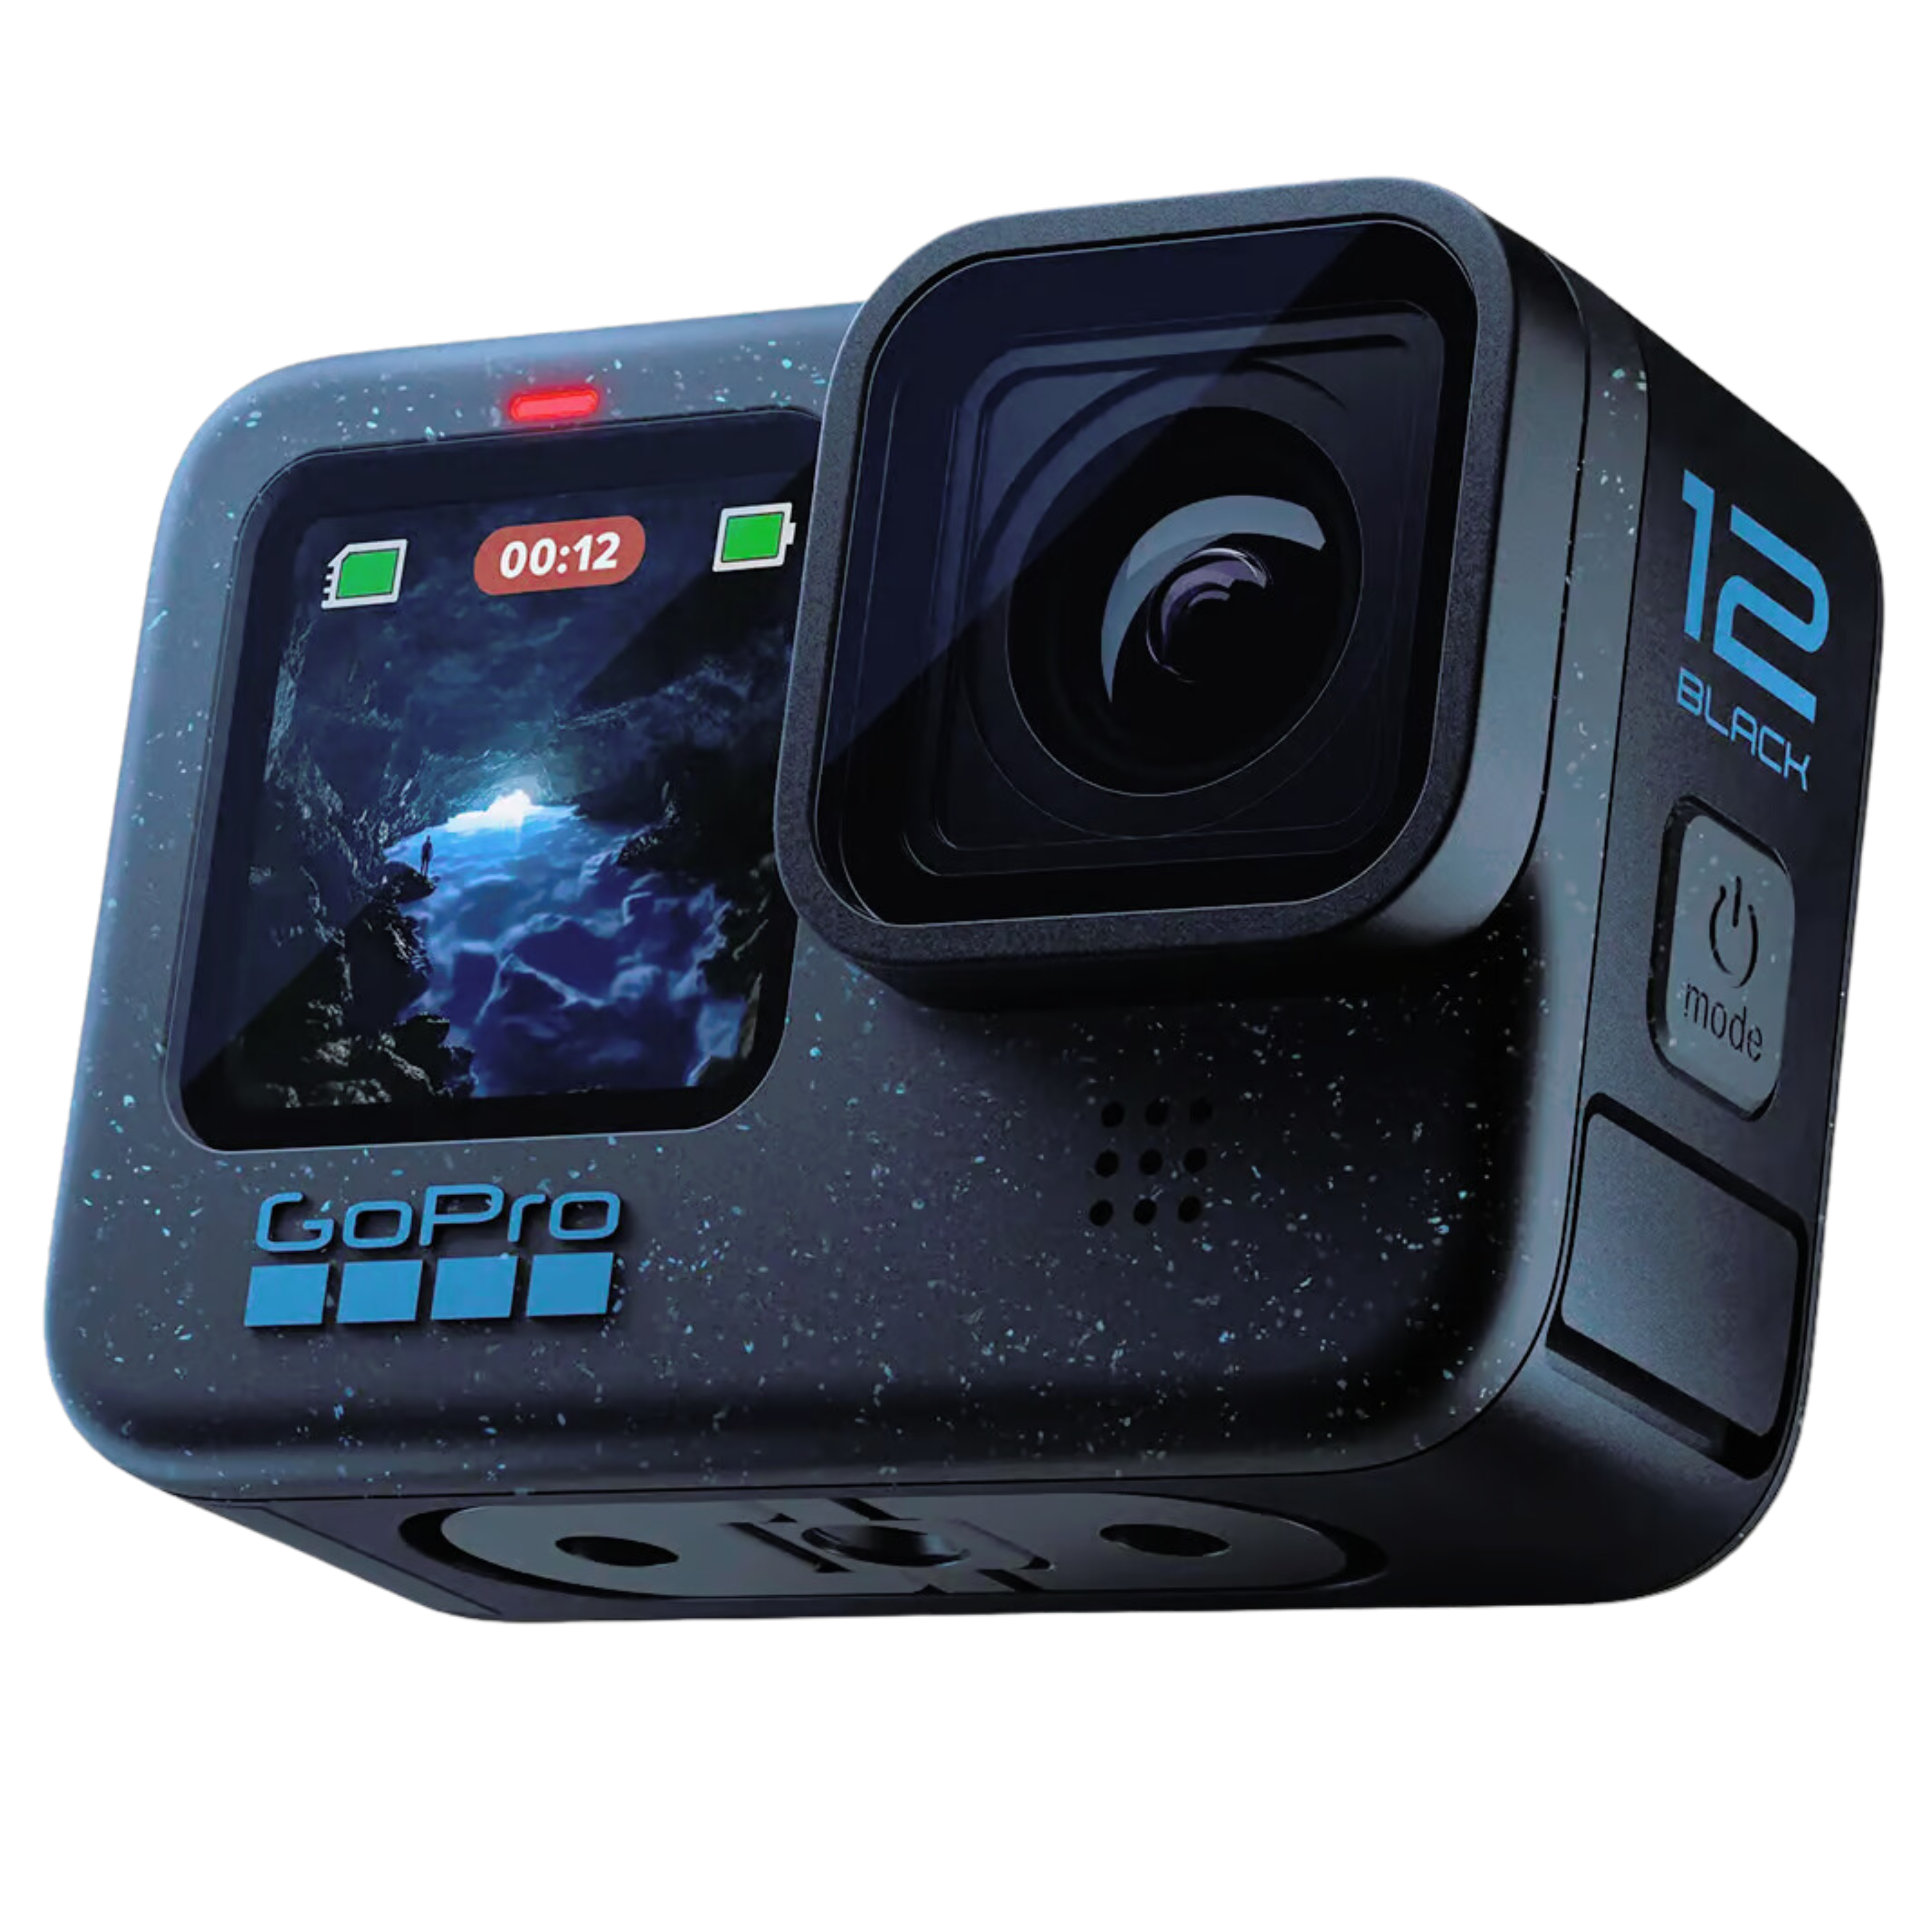 This is an image of GoPro Hero 12 on rent offered by SharePal.in